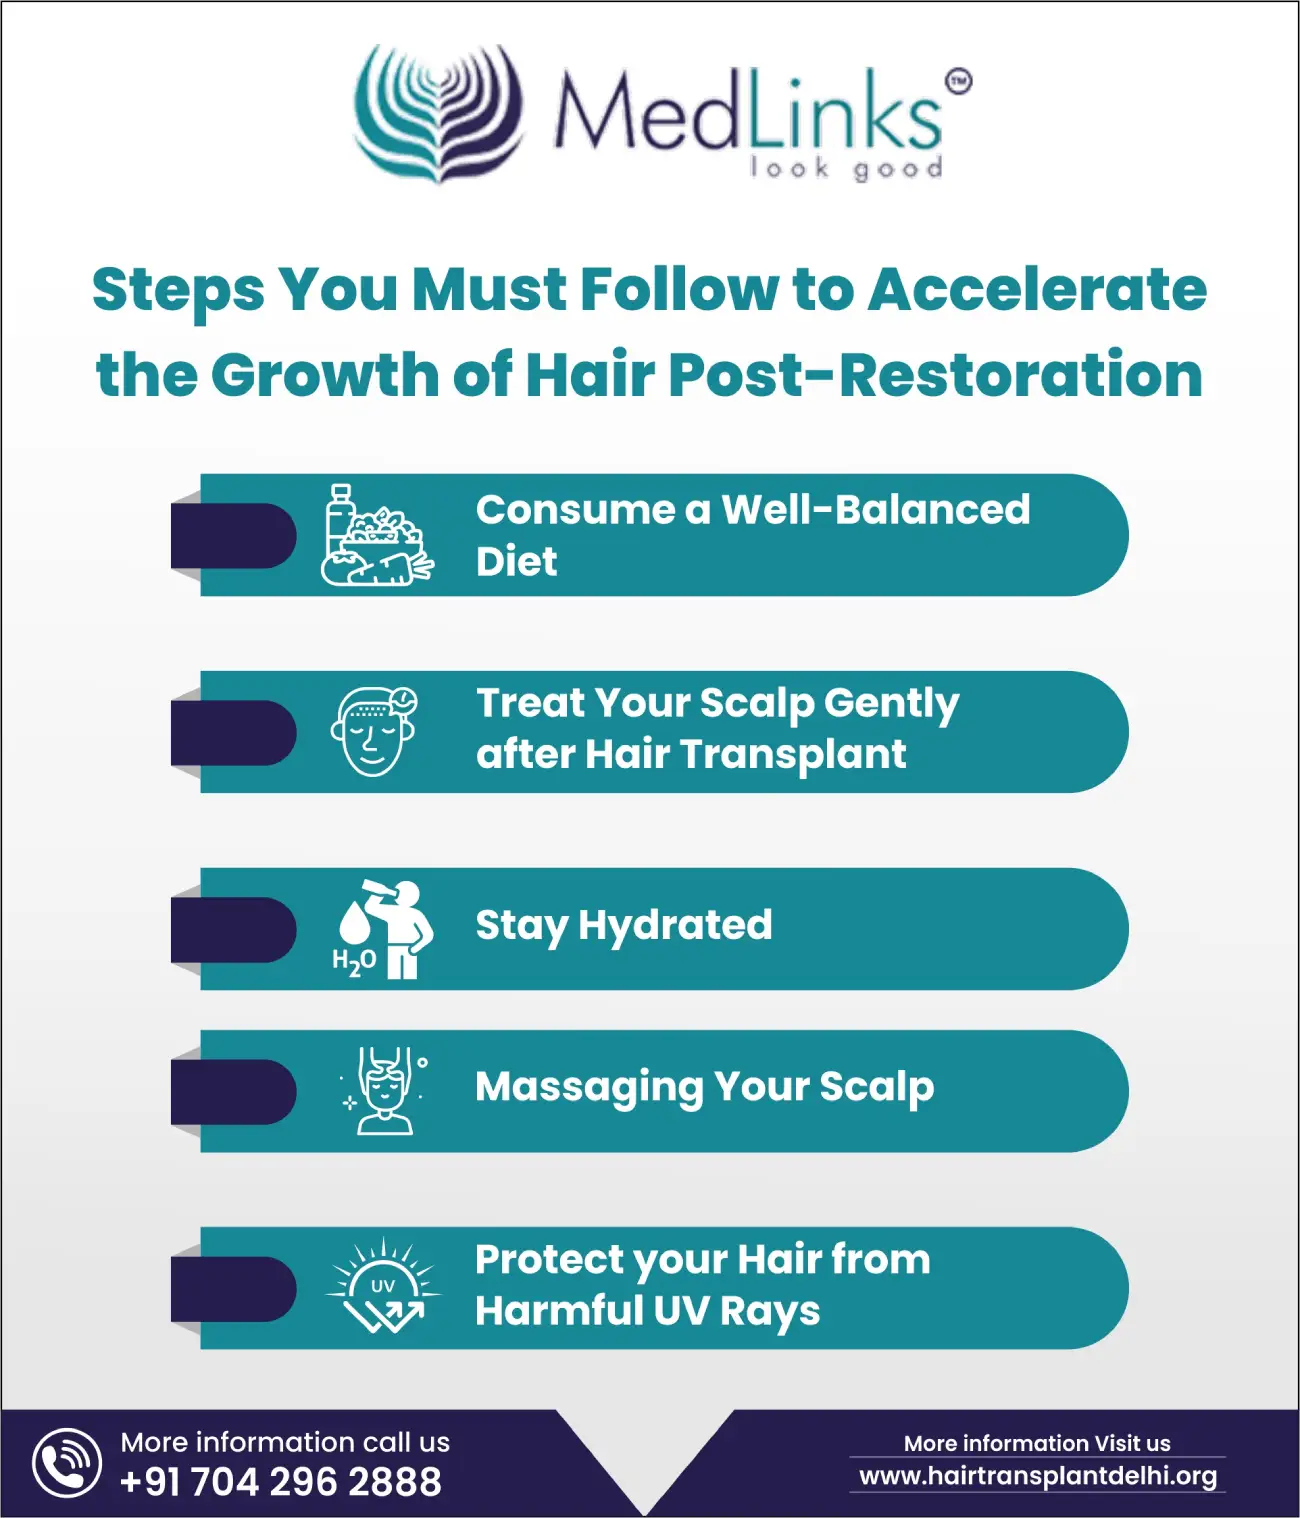 How Much Time Does It Take For Hair To Develop After Hair Transplant? | Hair  Sure